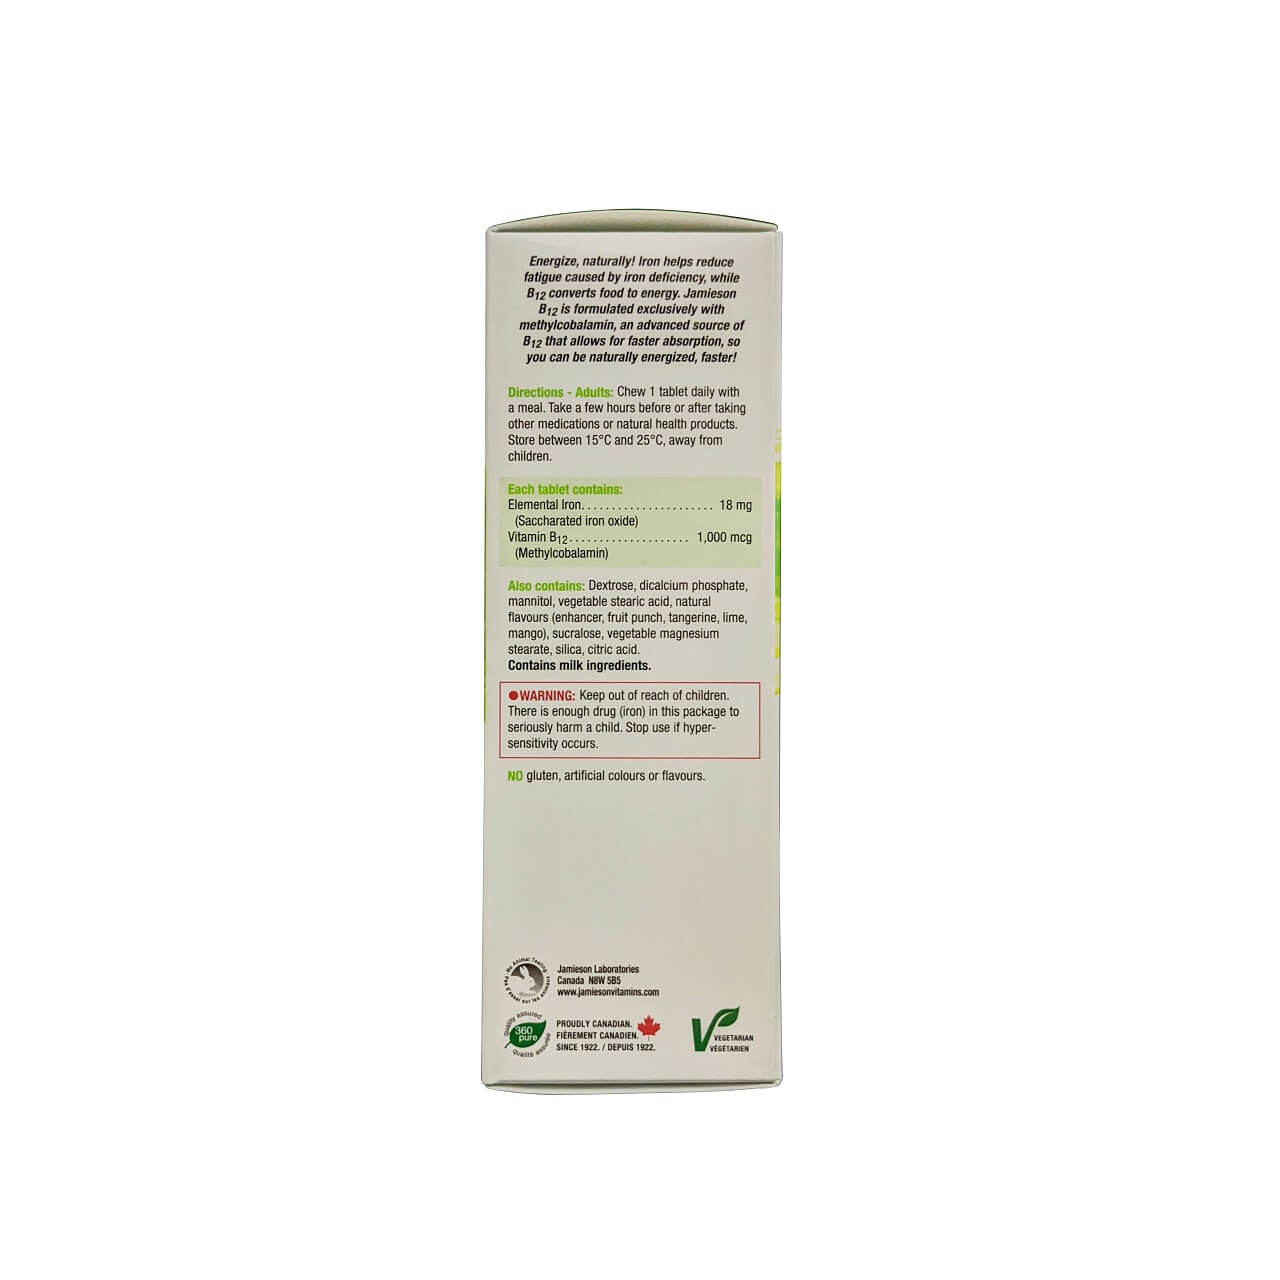 Description, directions, ingredients, warnings for Jamieson Iron Plus B12 Topical Mango Lime Flavour (45 chewables tablets) in English